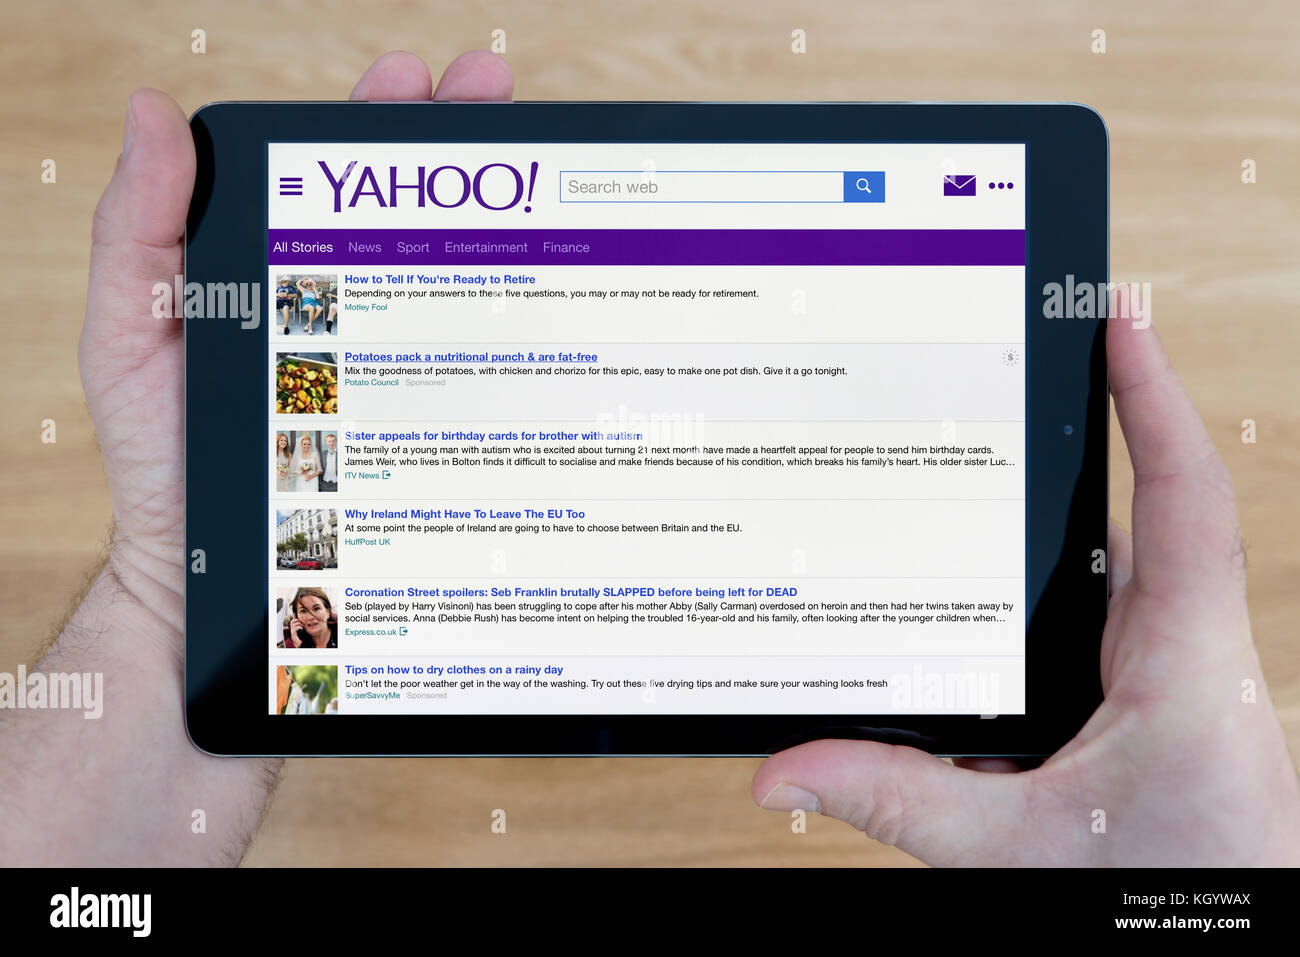 The Ins and Outs of Yahoo Sponsored Mail Ads